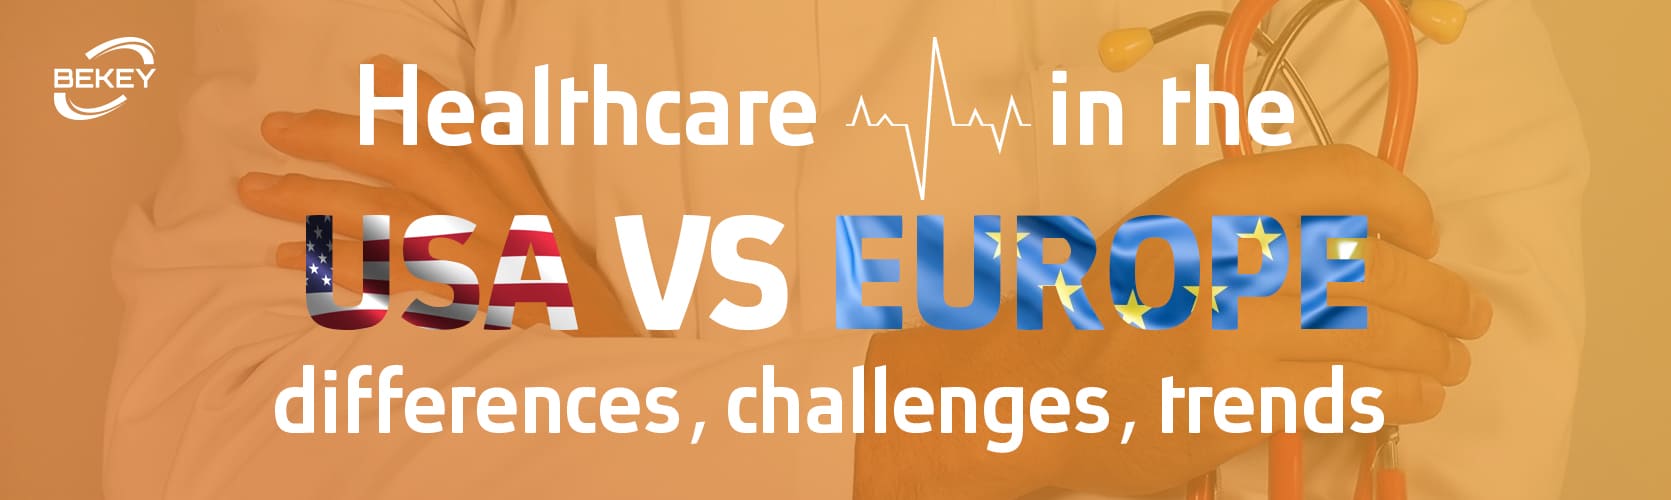 Healthcare systems in the USA and Europe: differences, challenges, trends 